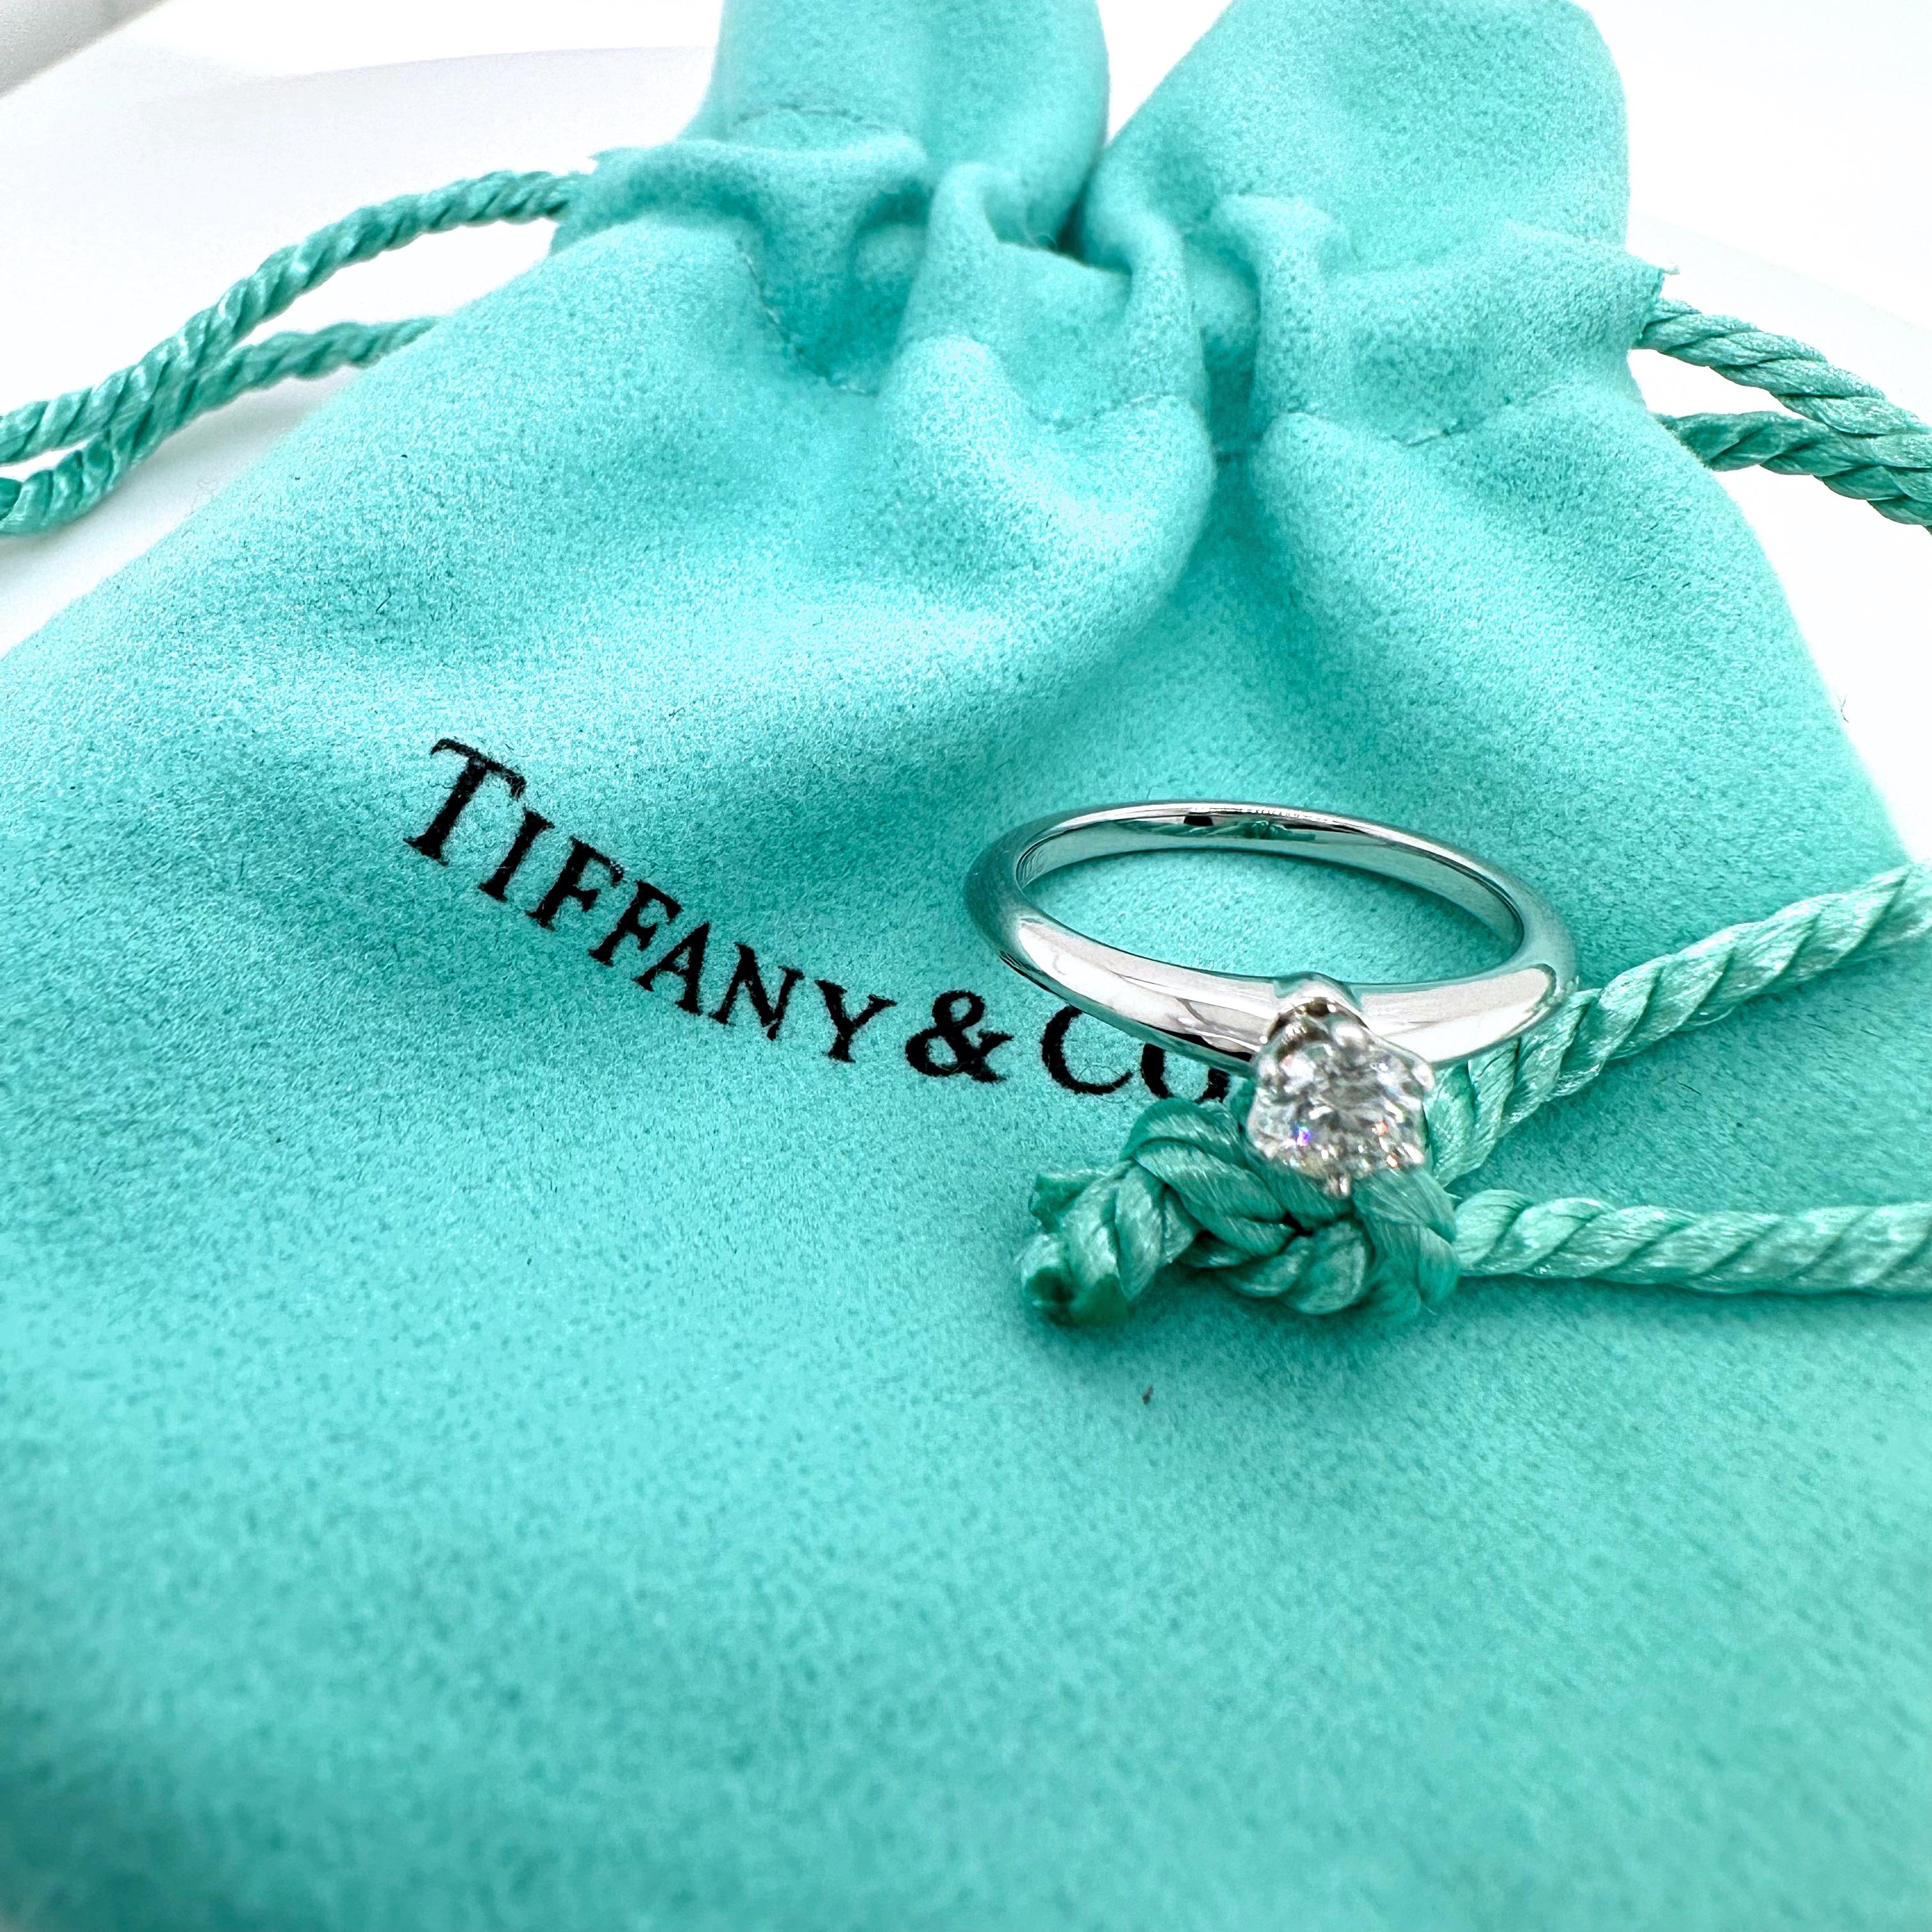 Tiffany & Co. Tiffany Setting Round Diamond Engagement Ring
Style:  Solitaire
Ref. number:  32274811
Metal:  Platinum
Size:  4.5 sizable
Measurements:  2 mm
Main Diamond:  0.20 cts
Color & Clarity:  G, VS1
Hallmark:  ©TIFFANY&CO. PT950 32274811 D.20